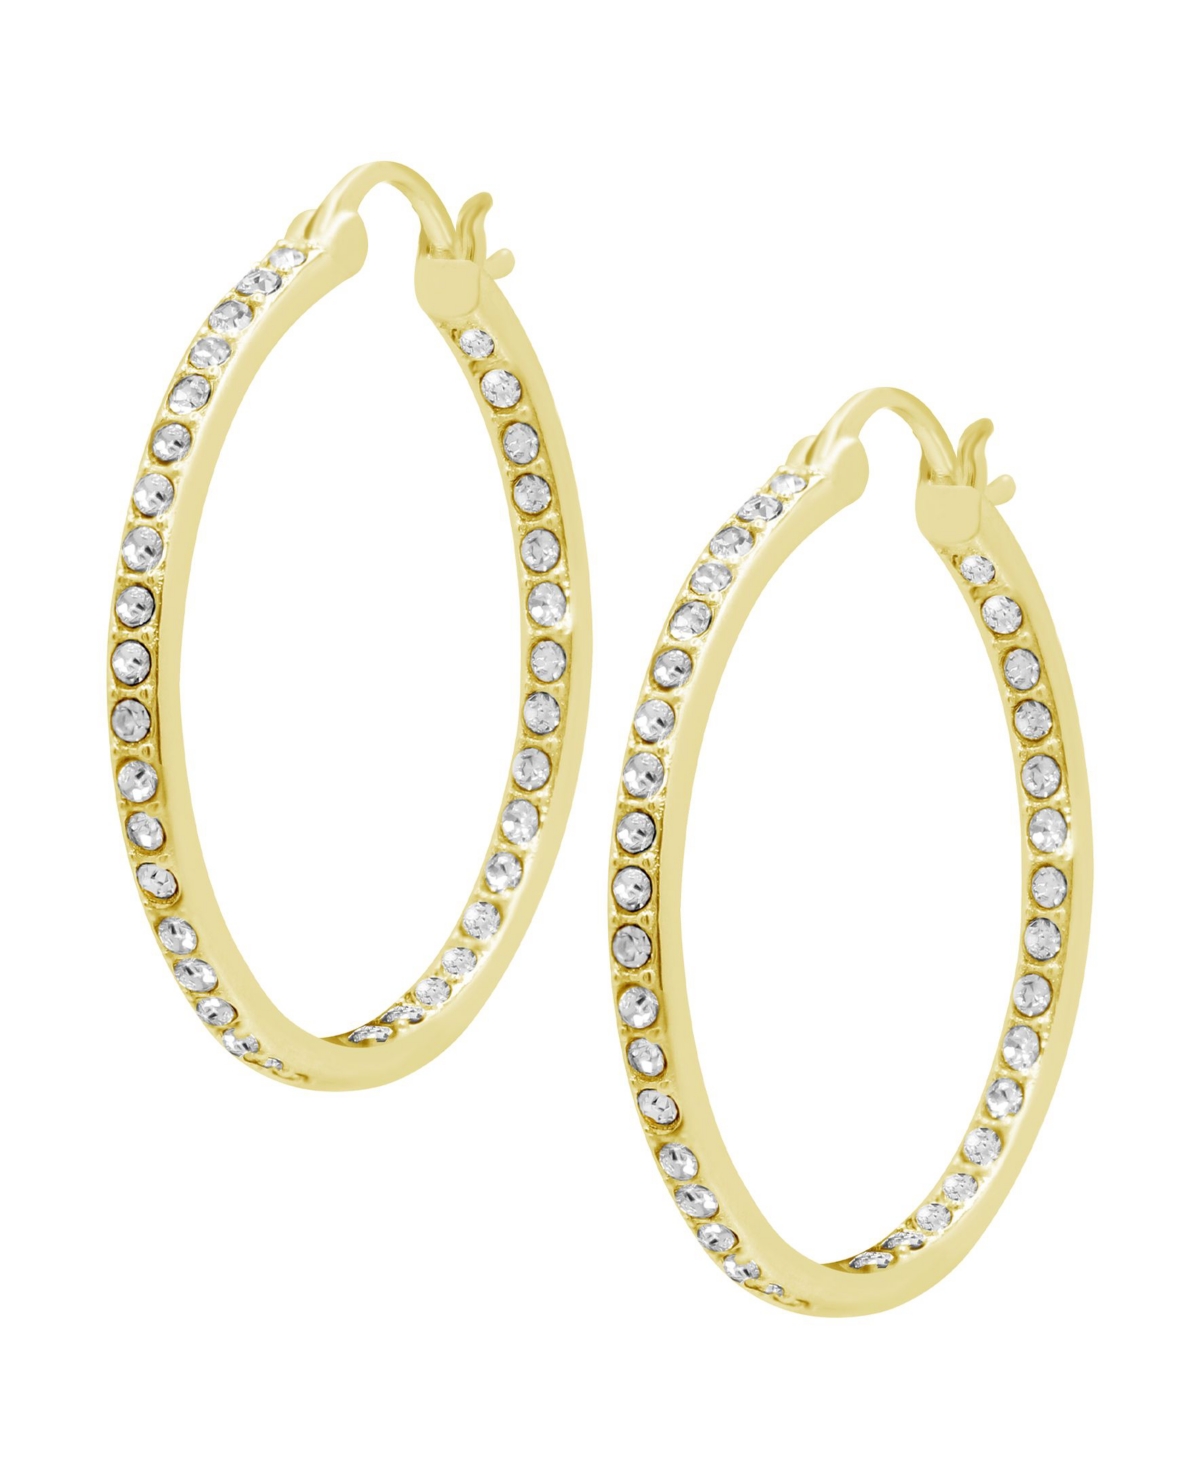 Silver or Gold Plated Clear Crystal Hoop Earrings - Gold-Plated